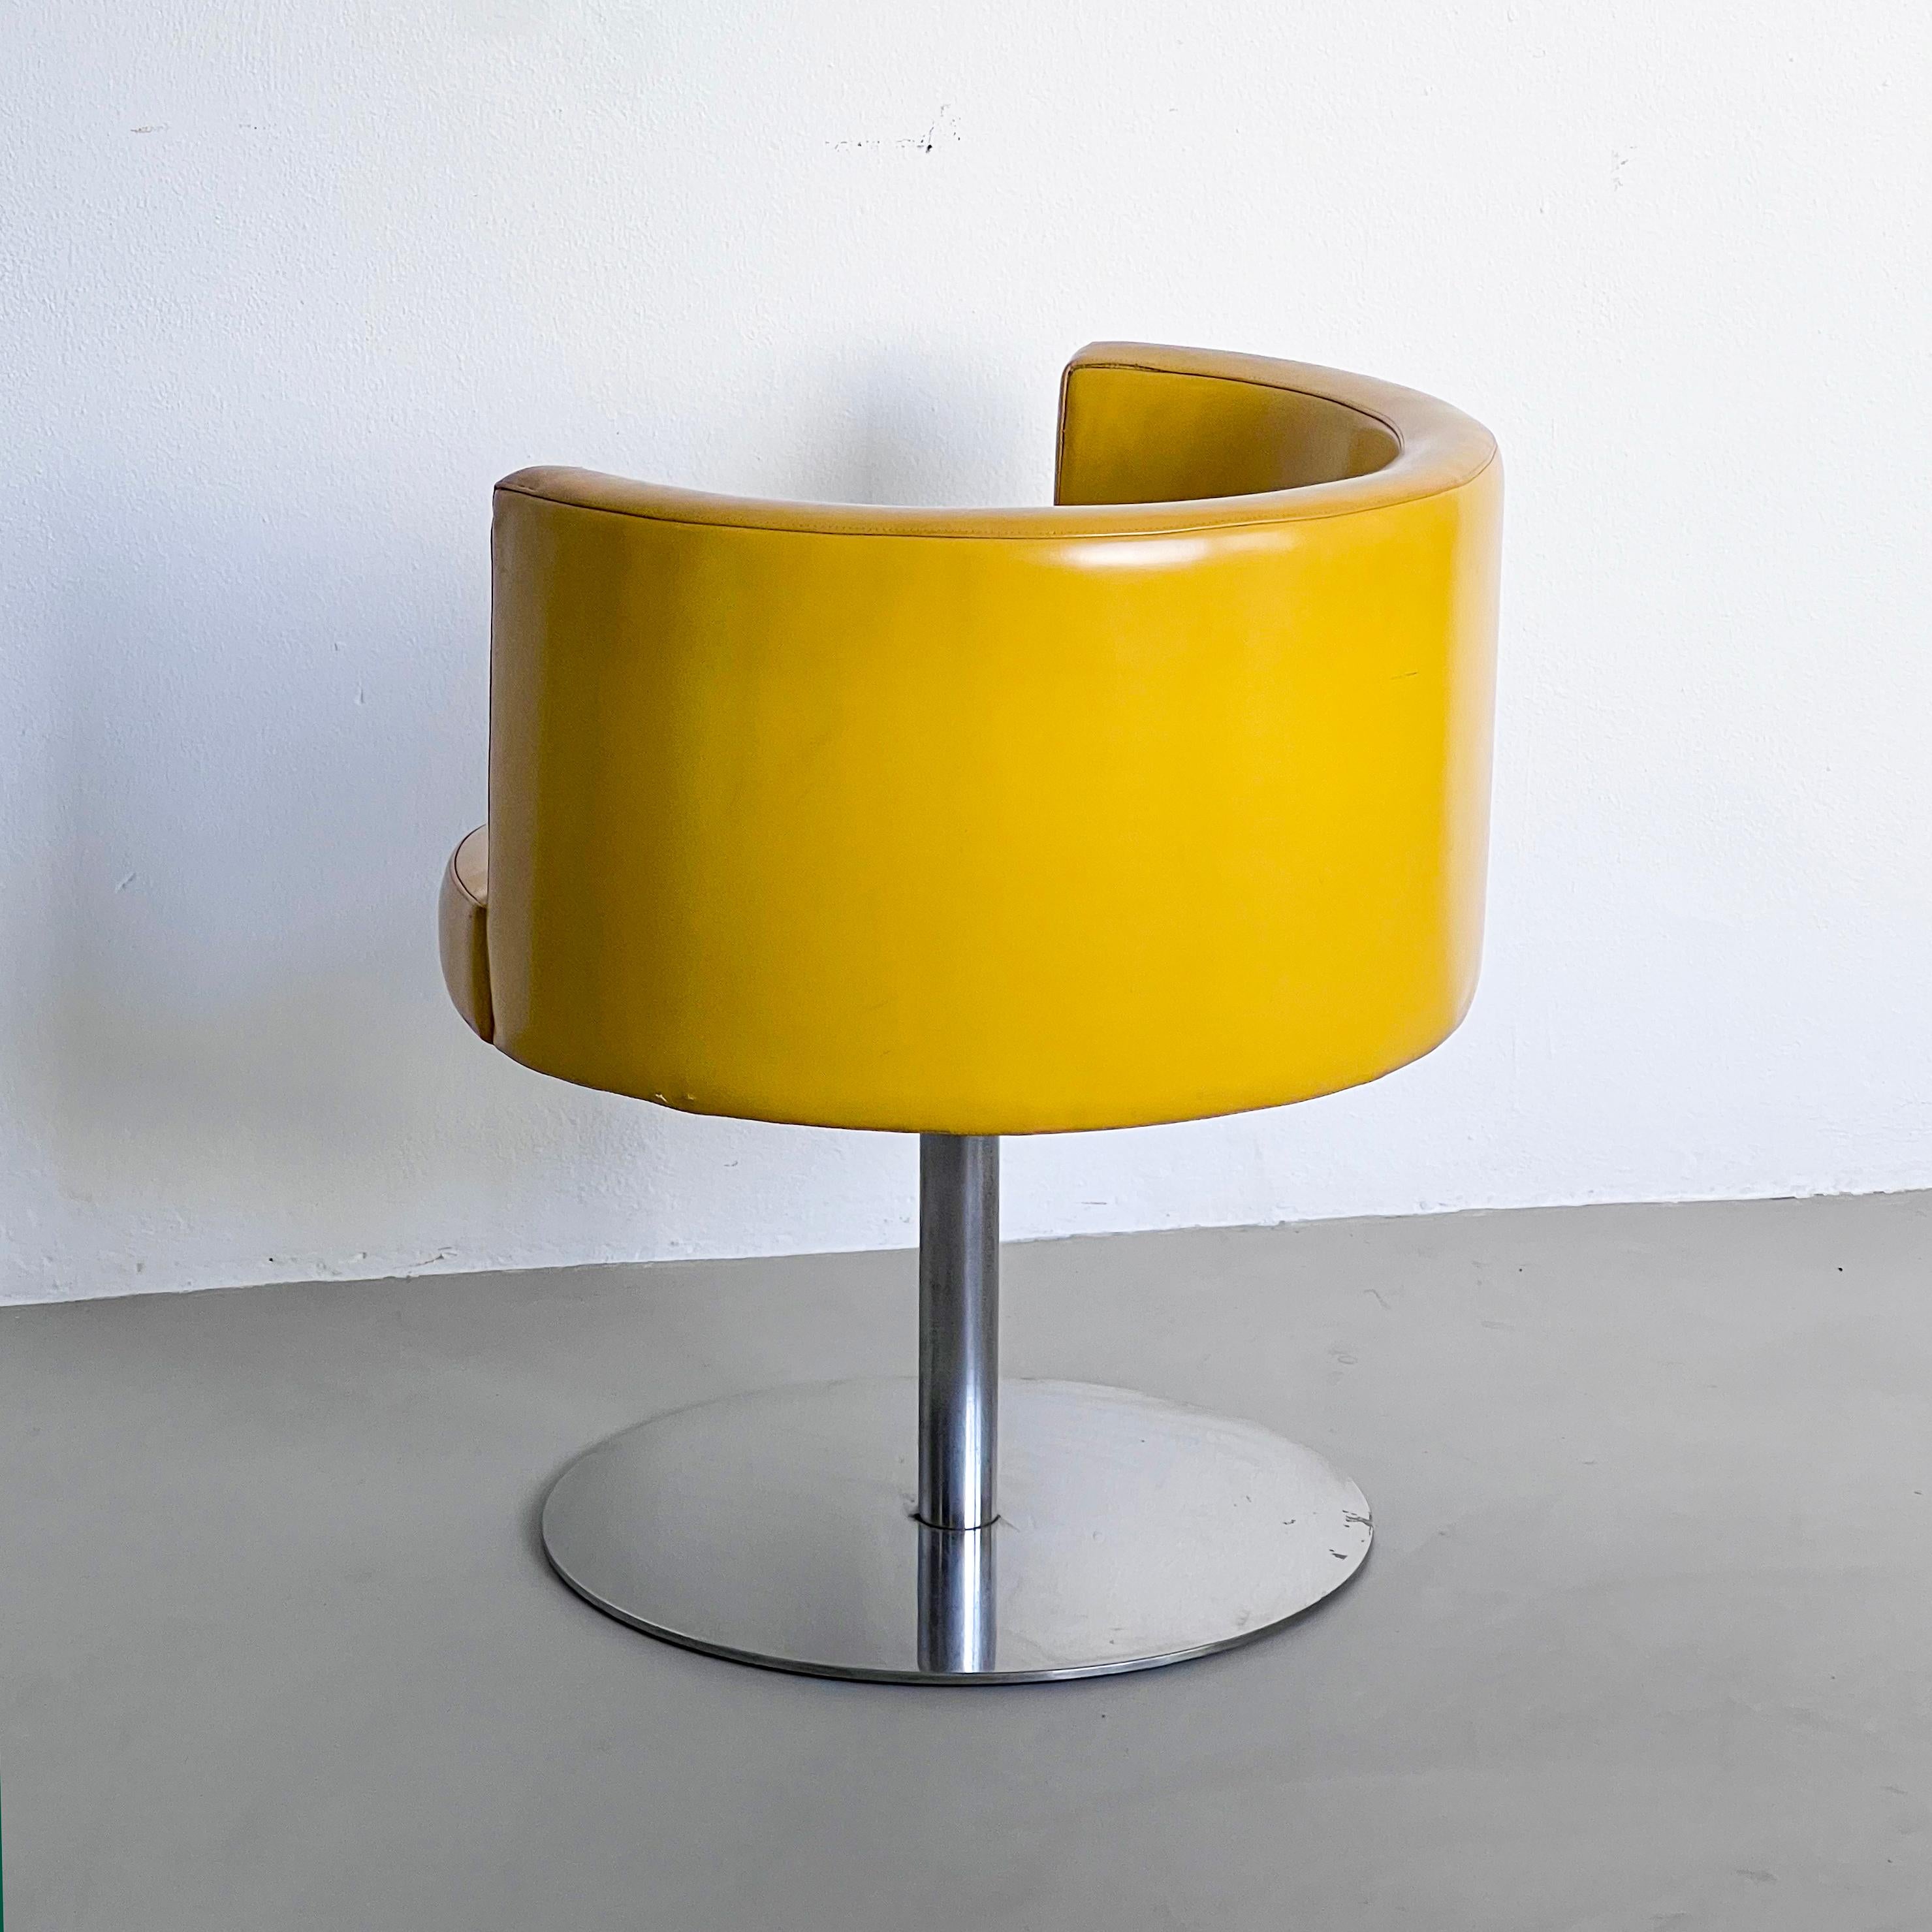 Late 20th Century Vintage Italian Space Age Yellow Leather Accent Swivel Chair by Antonia Astori For Sale